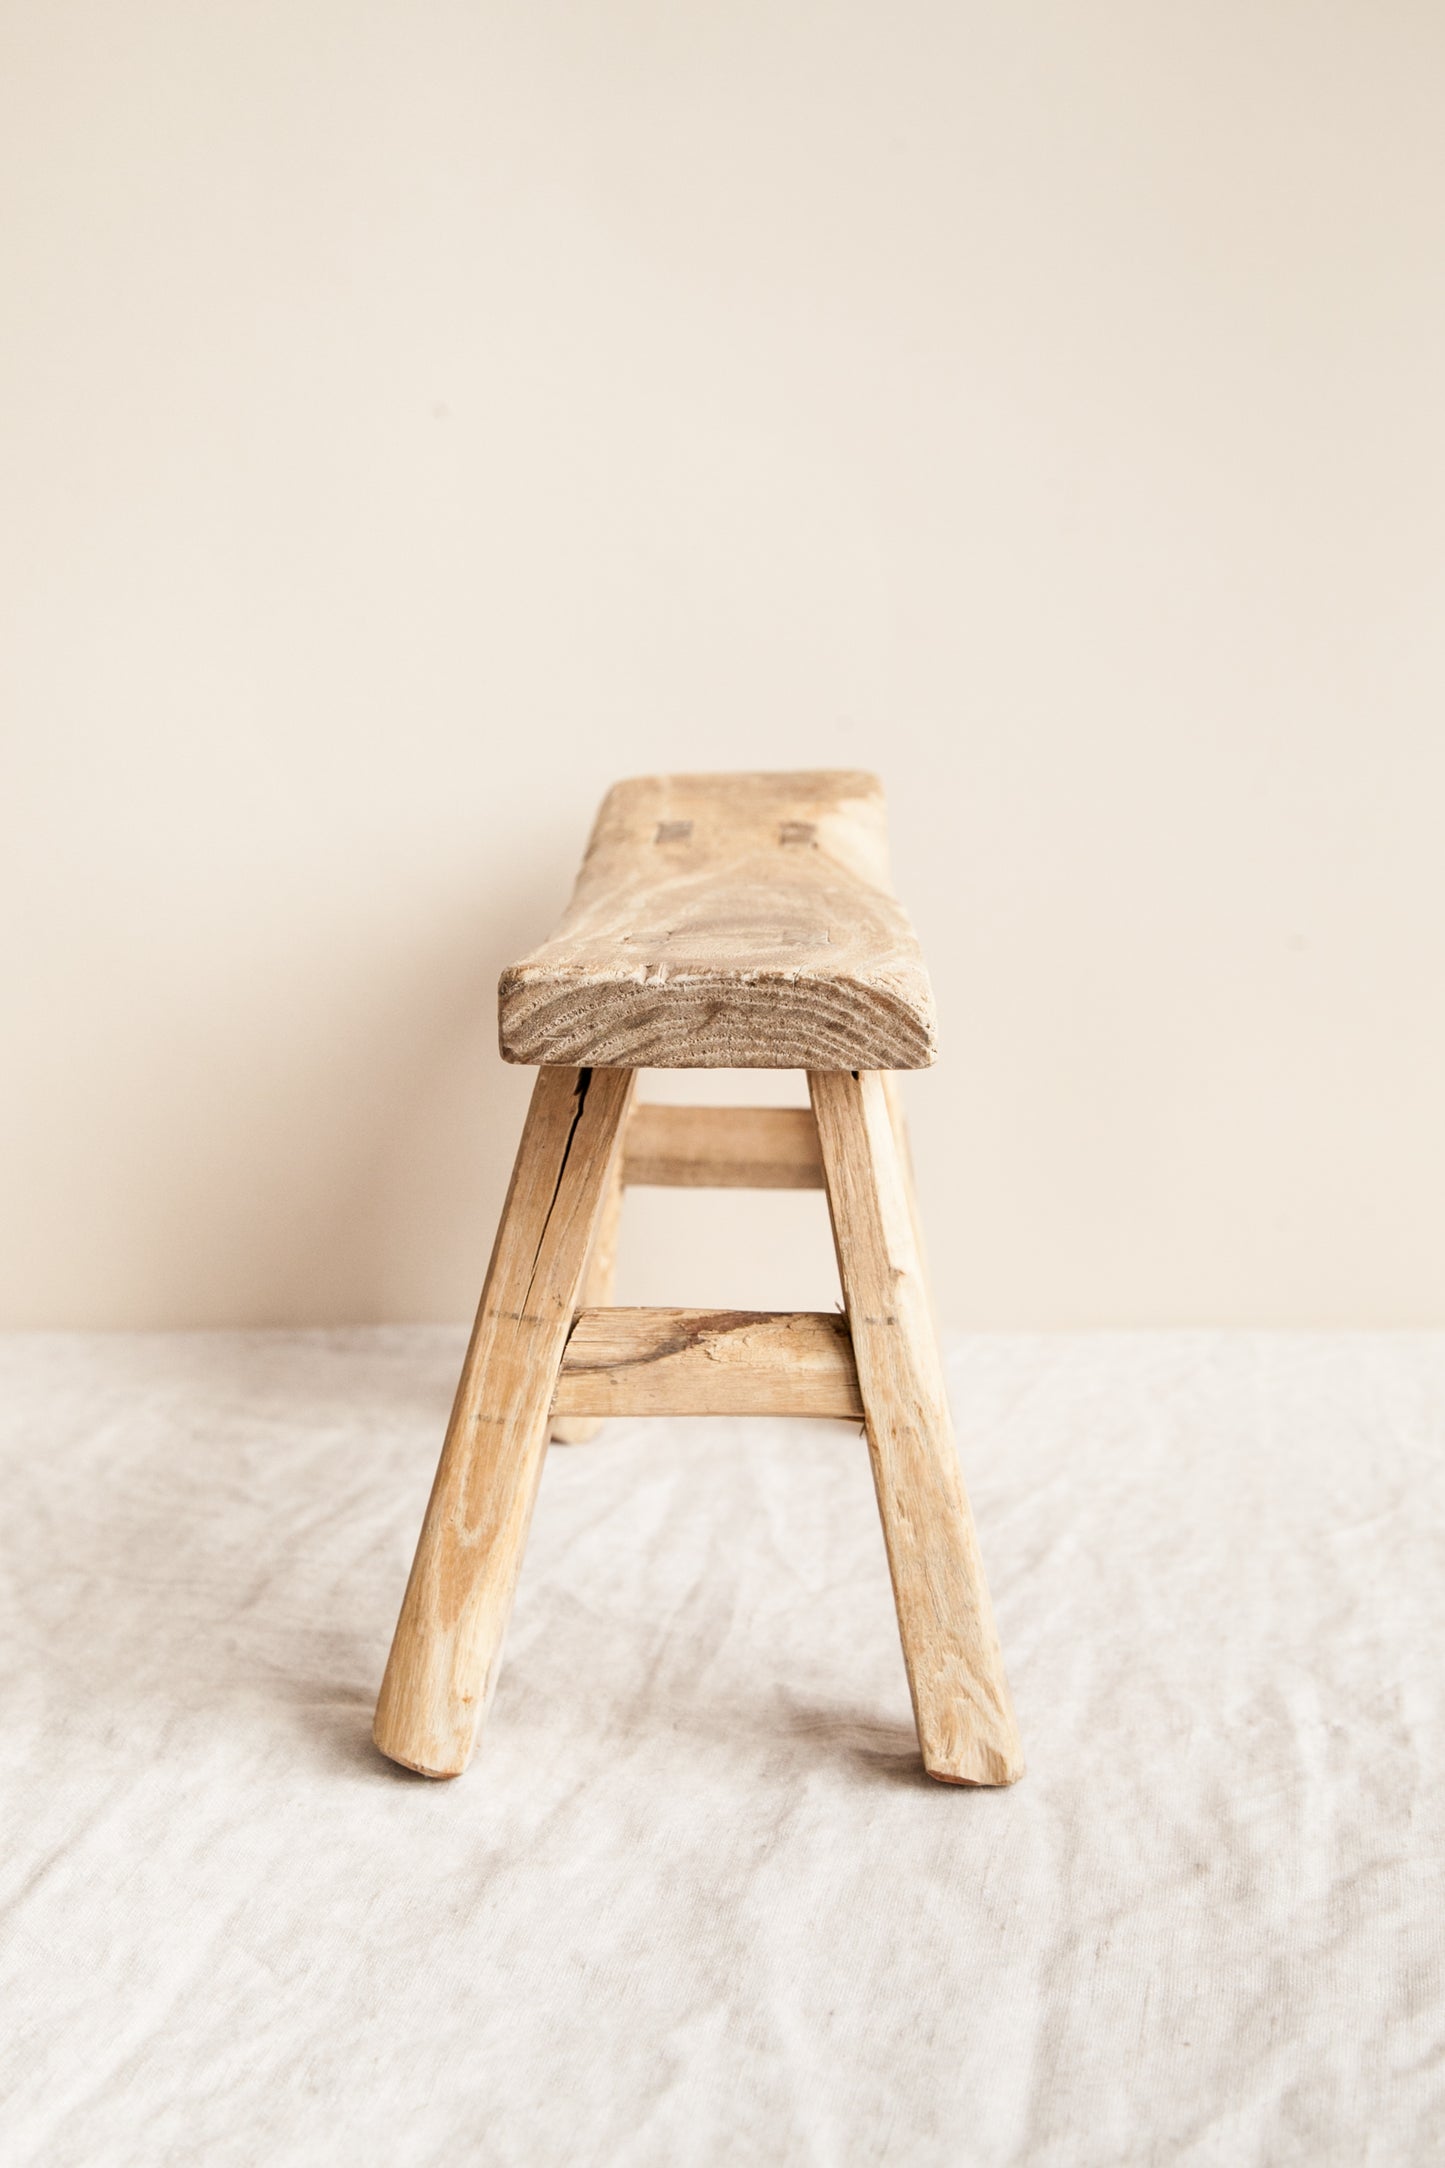 Load image into Gallery viewer, Antique Milking Stool - Miniature
